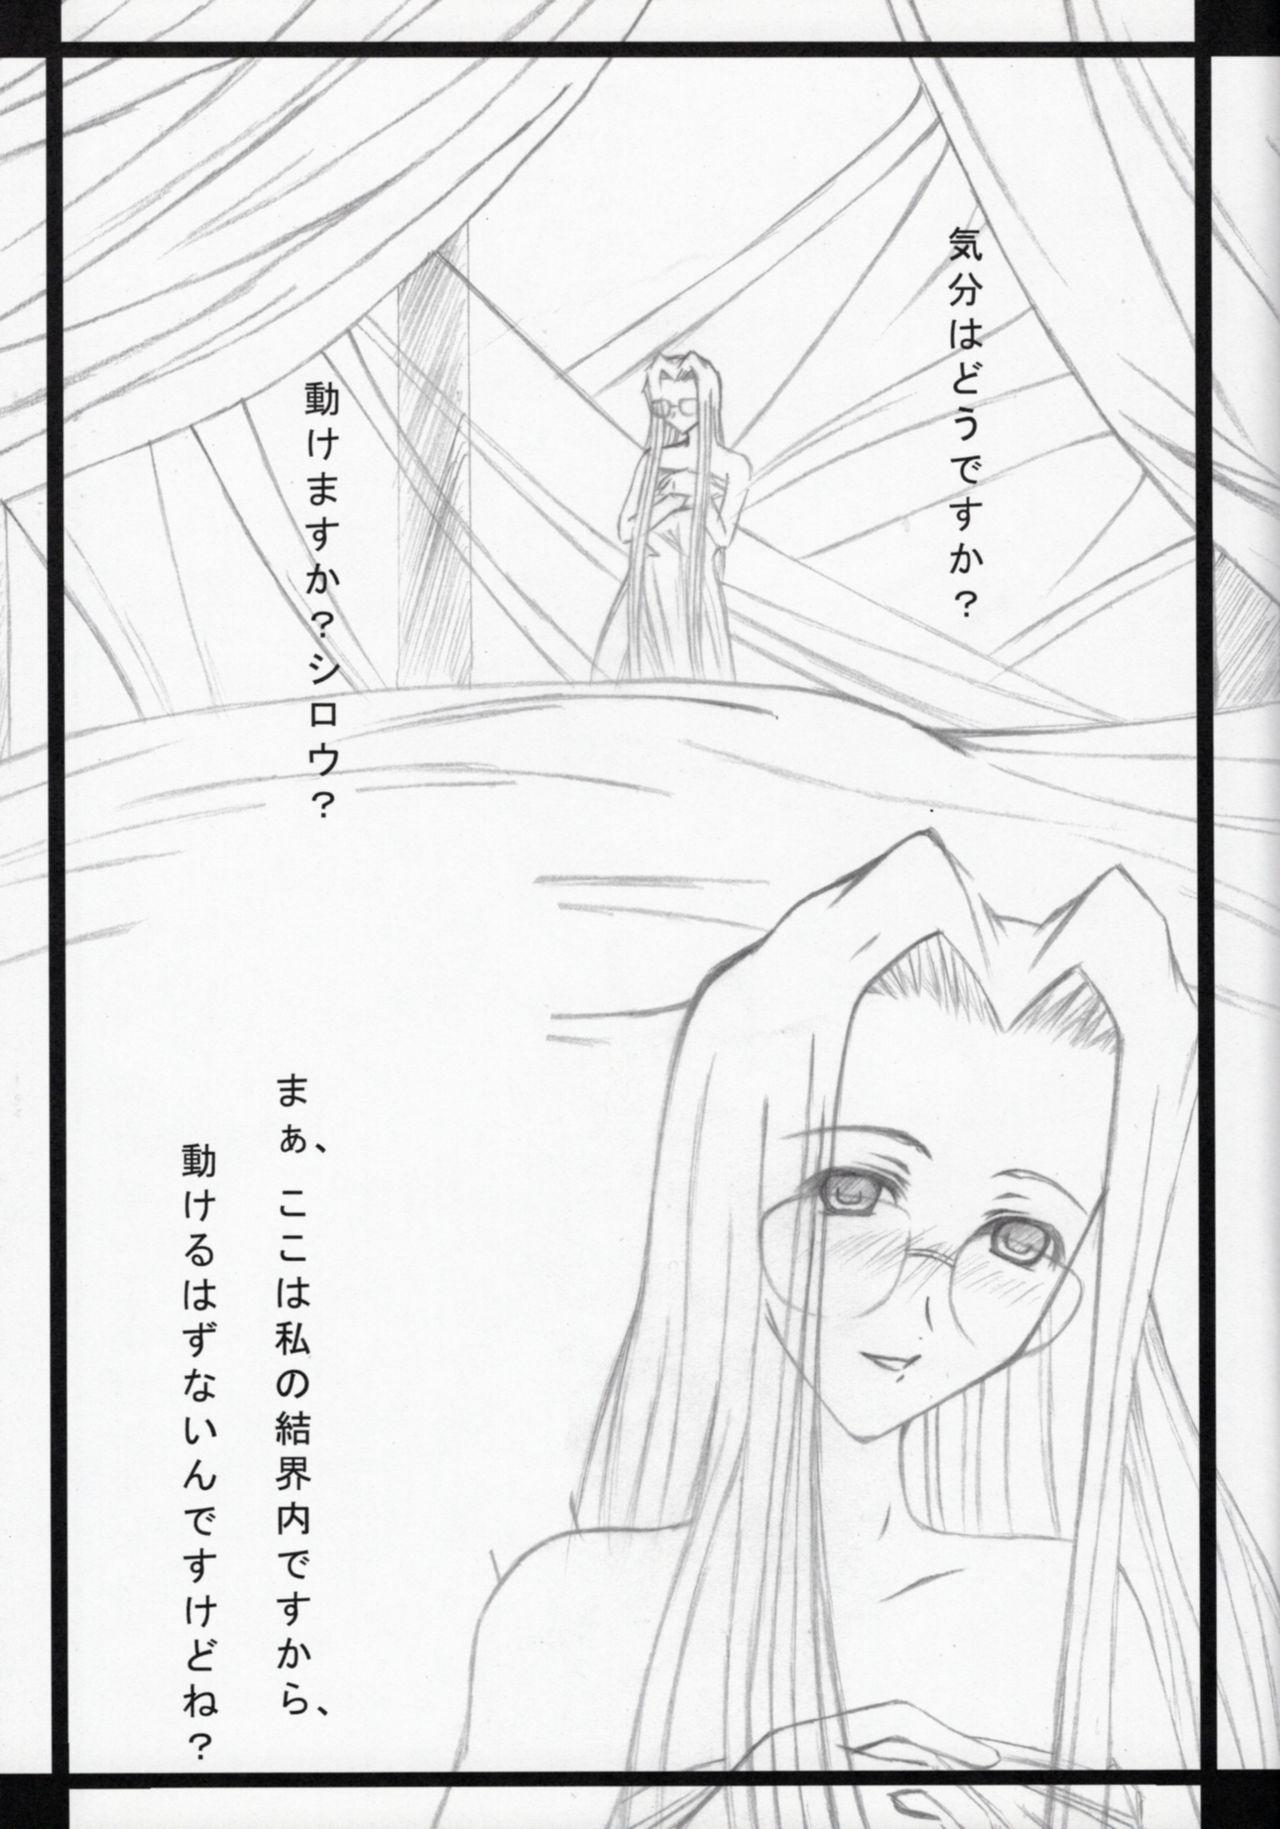 Finger Rider-san Hatsujouchuu! - Fate stay night Actress - Page 3